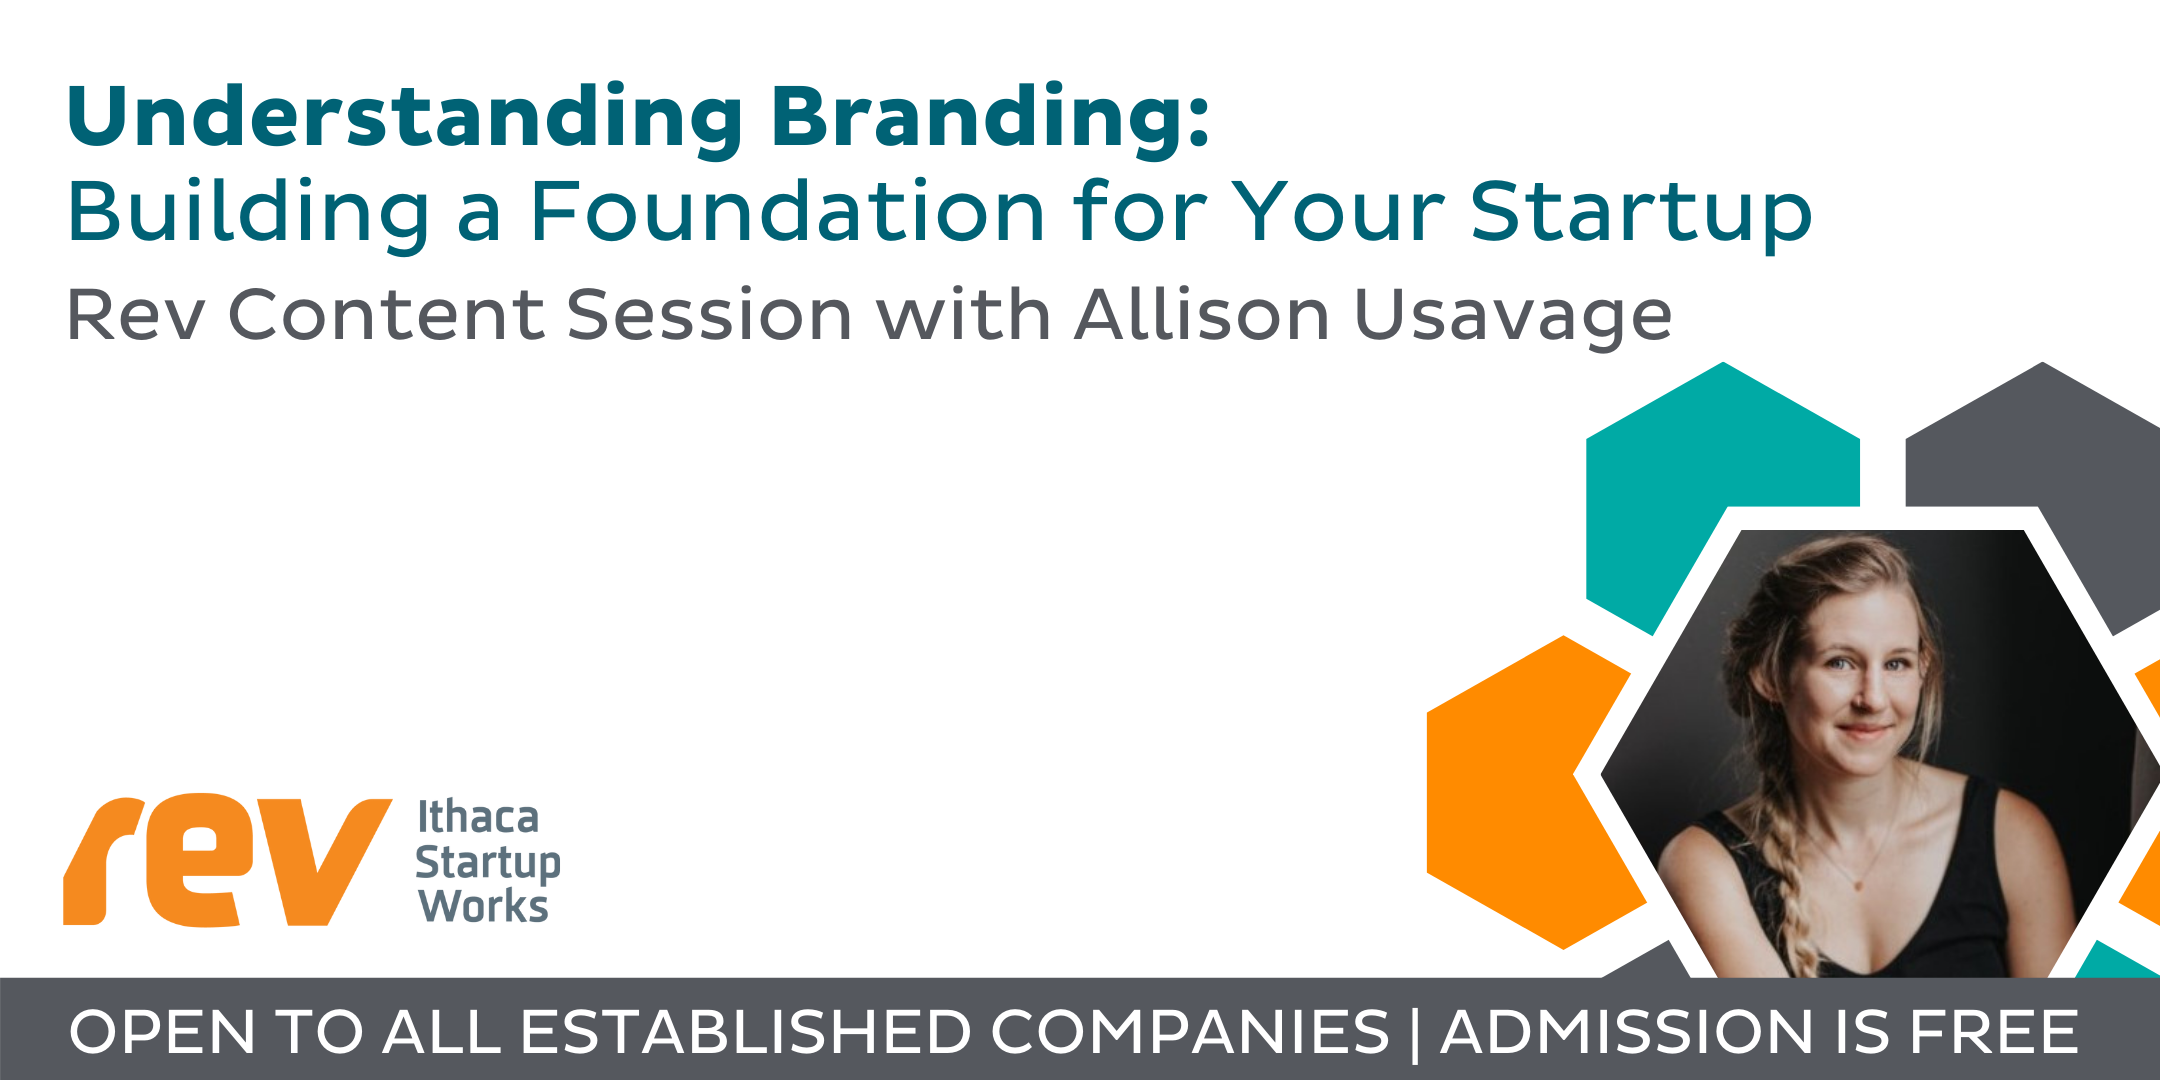 Graphic: Understanding Branding: Building a Foundation for Your Startup. Rev Content Session with Allison Usavage. Rev: Ithaca Startup Works logo.